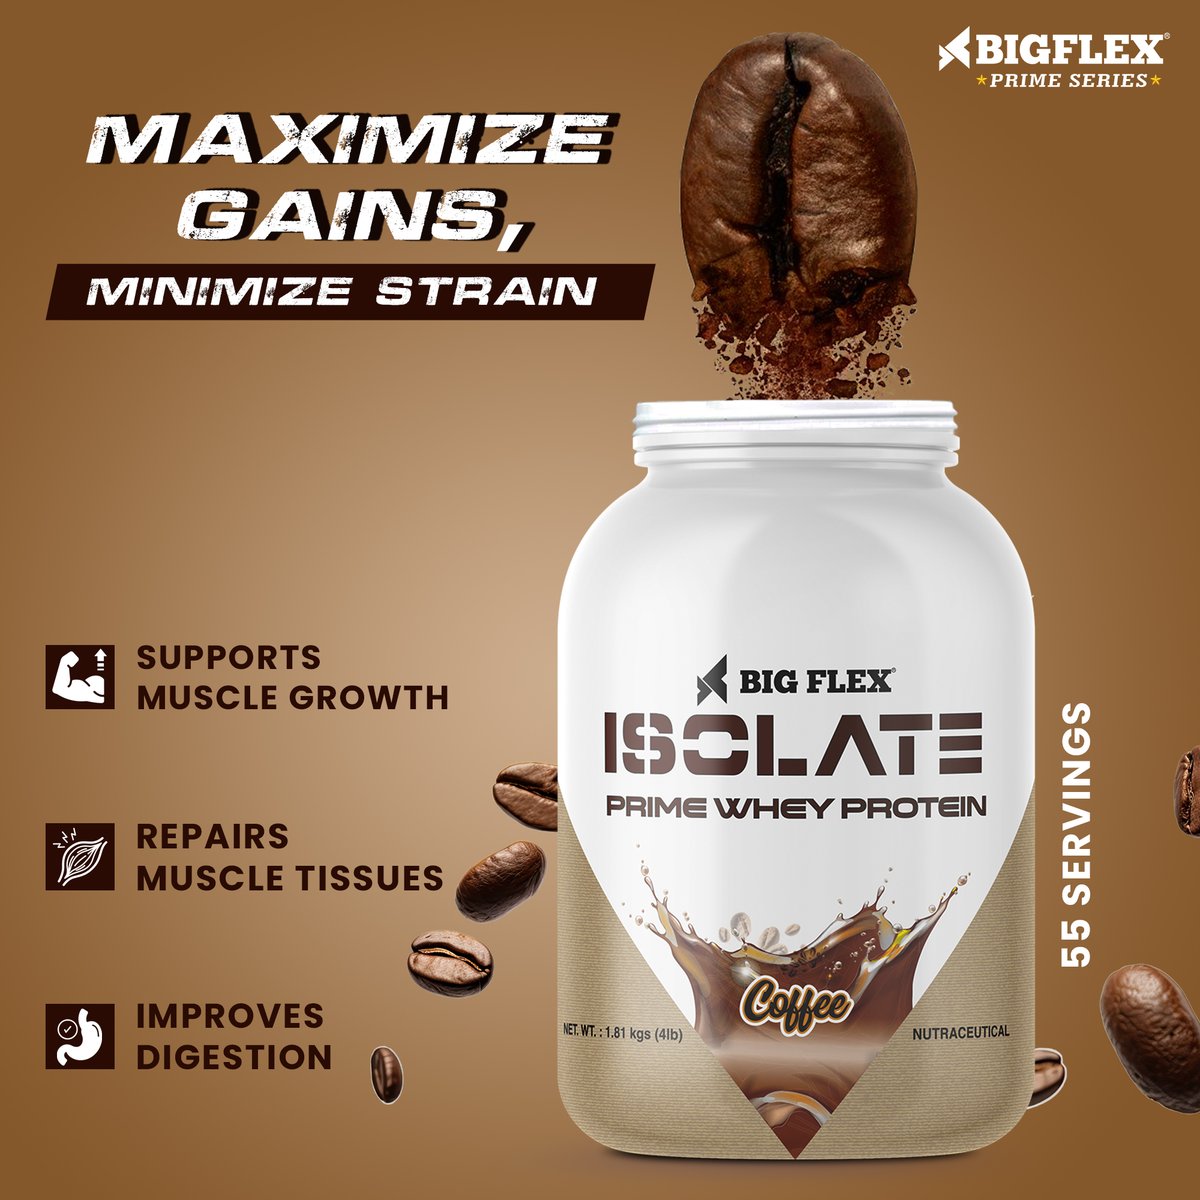 Sip, lift, repeat. Coffee Flavour Isolate Prime Whey: the ultimate muscle-building brew. 💪

#primewhey #muscle #muscles #muscleup #gain #gains #gainparty #gaintricks #whey #wheyprotein #fitness #fit #fitnessmodel #fitnesslifestyle #fitnessmotivation #fitnessmotivation #fitgirls